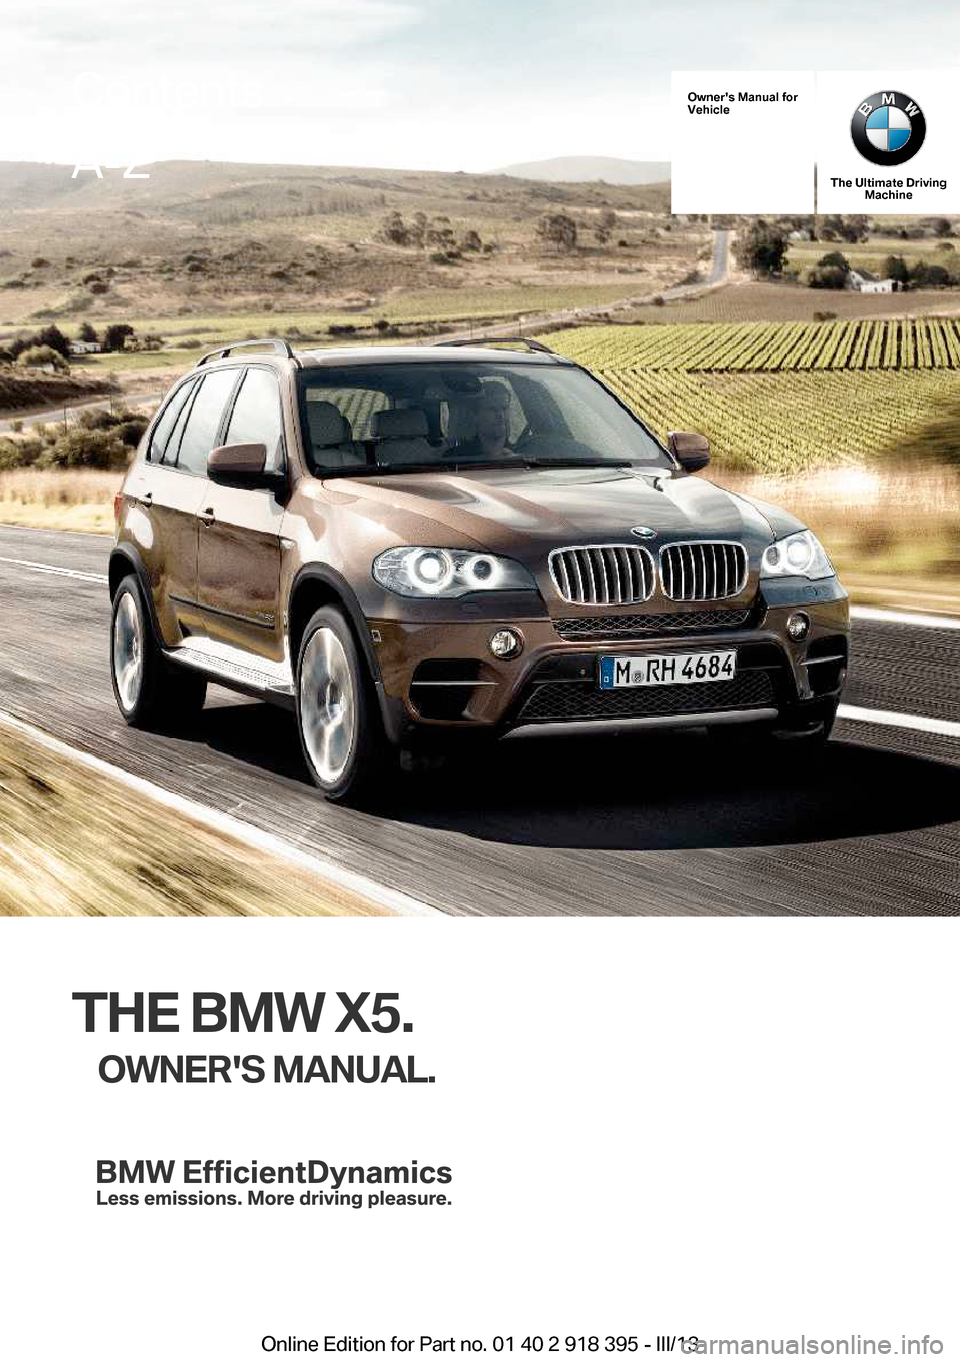 BMW X5 2013 E70 Owners Manual Owners Manual for
Vehicle
The Ultimate Driving Machine
THE BMW X5.
OWNERS MANUAL.
ContentsA-Z
Online Edition for Part no. 01 40 2 918 395 - III/13   